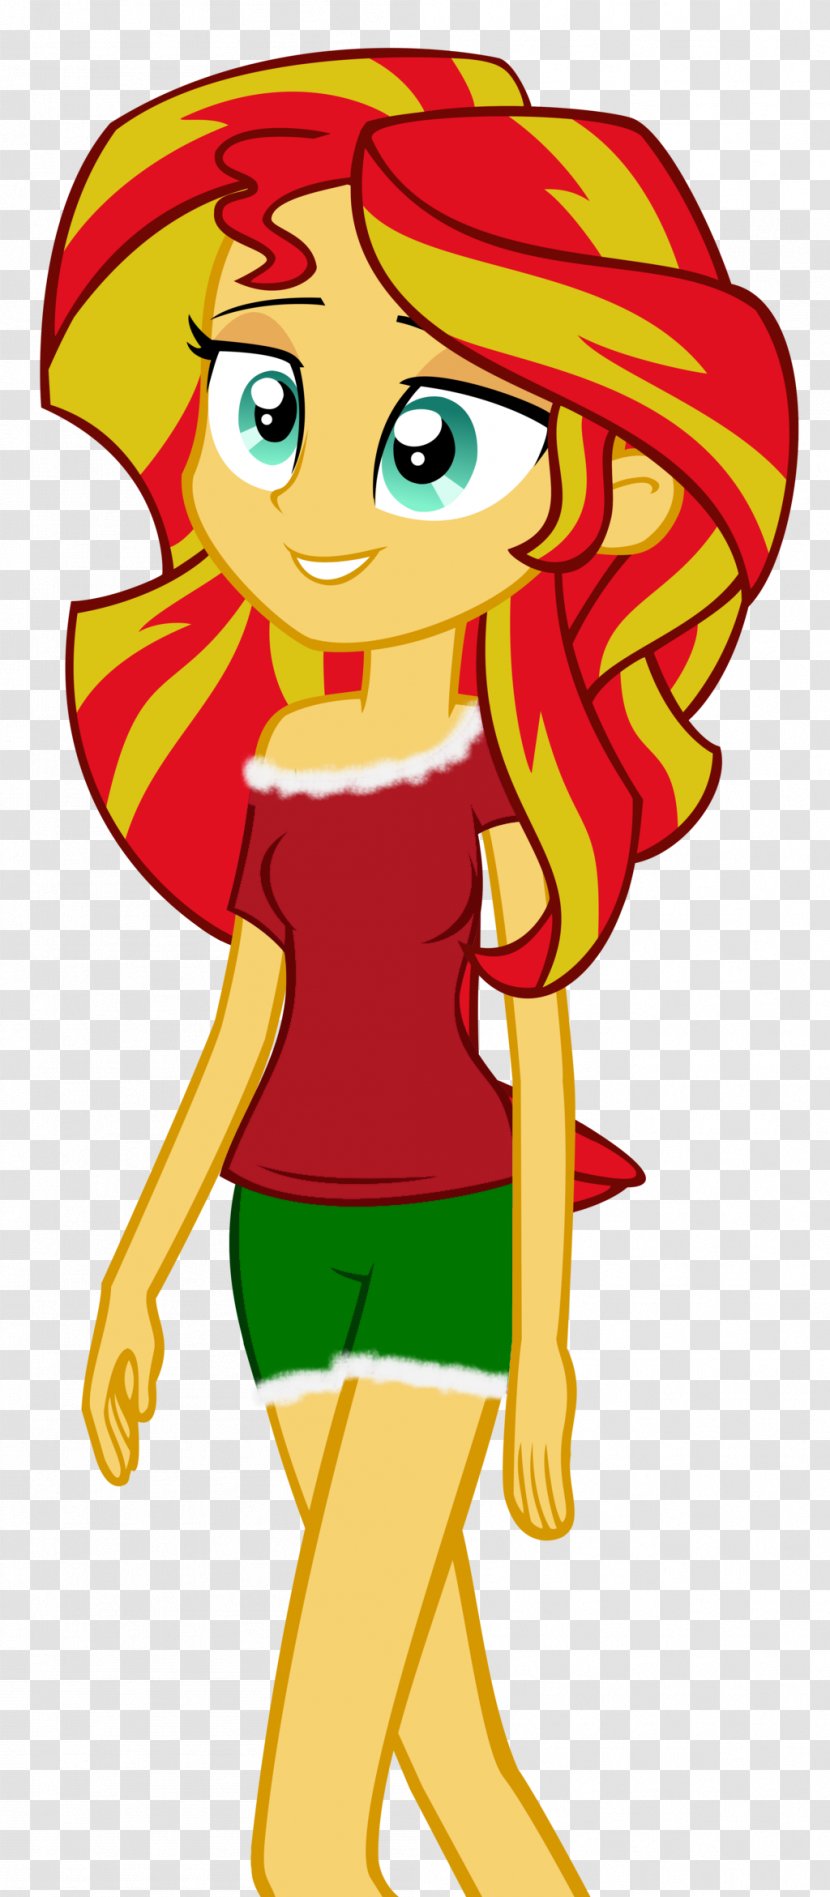 Sunset Shimmer Pony Princess Cadance Flash Sentry Fluttershy - Fictional Character - 8 Days Left Countdown Transparent PNG